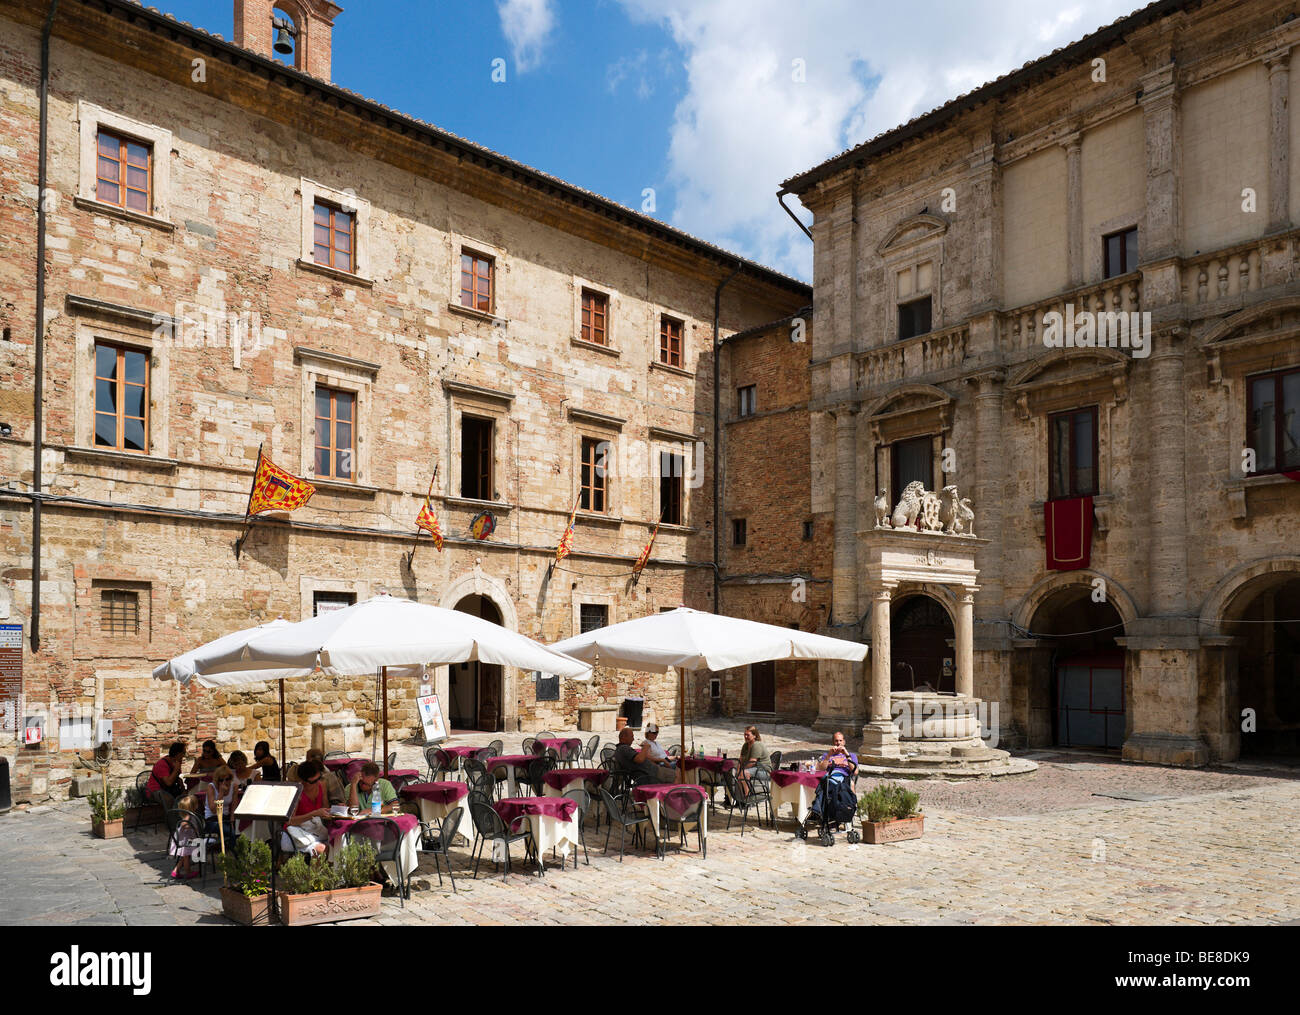 Street cafe in front of the Palazzo Tarugi in the Piazza Grande, Montepulciano, Tuscany, Italy Stock Photo